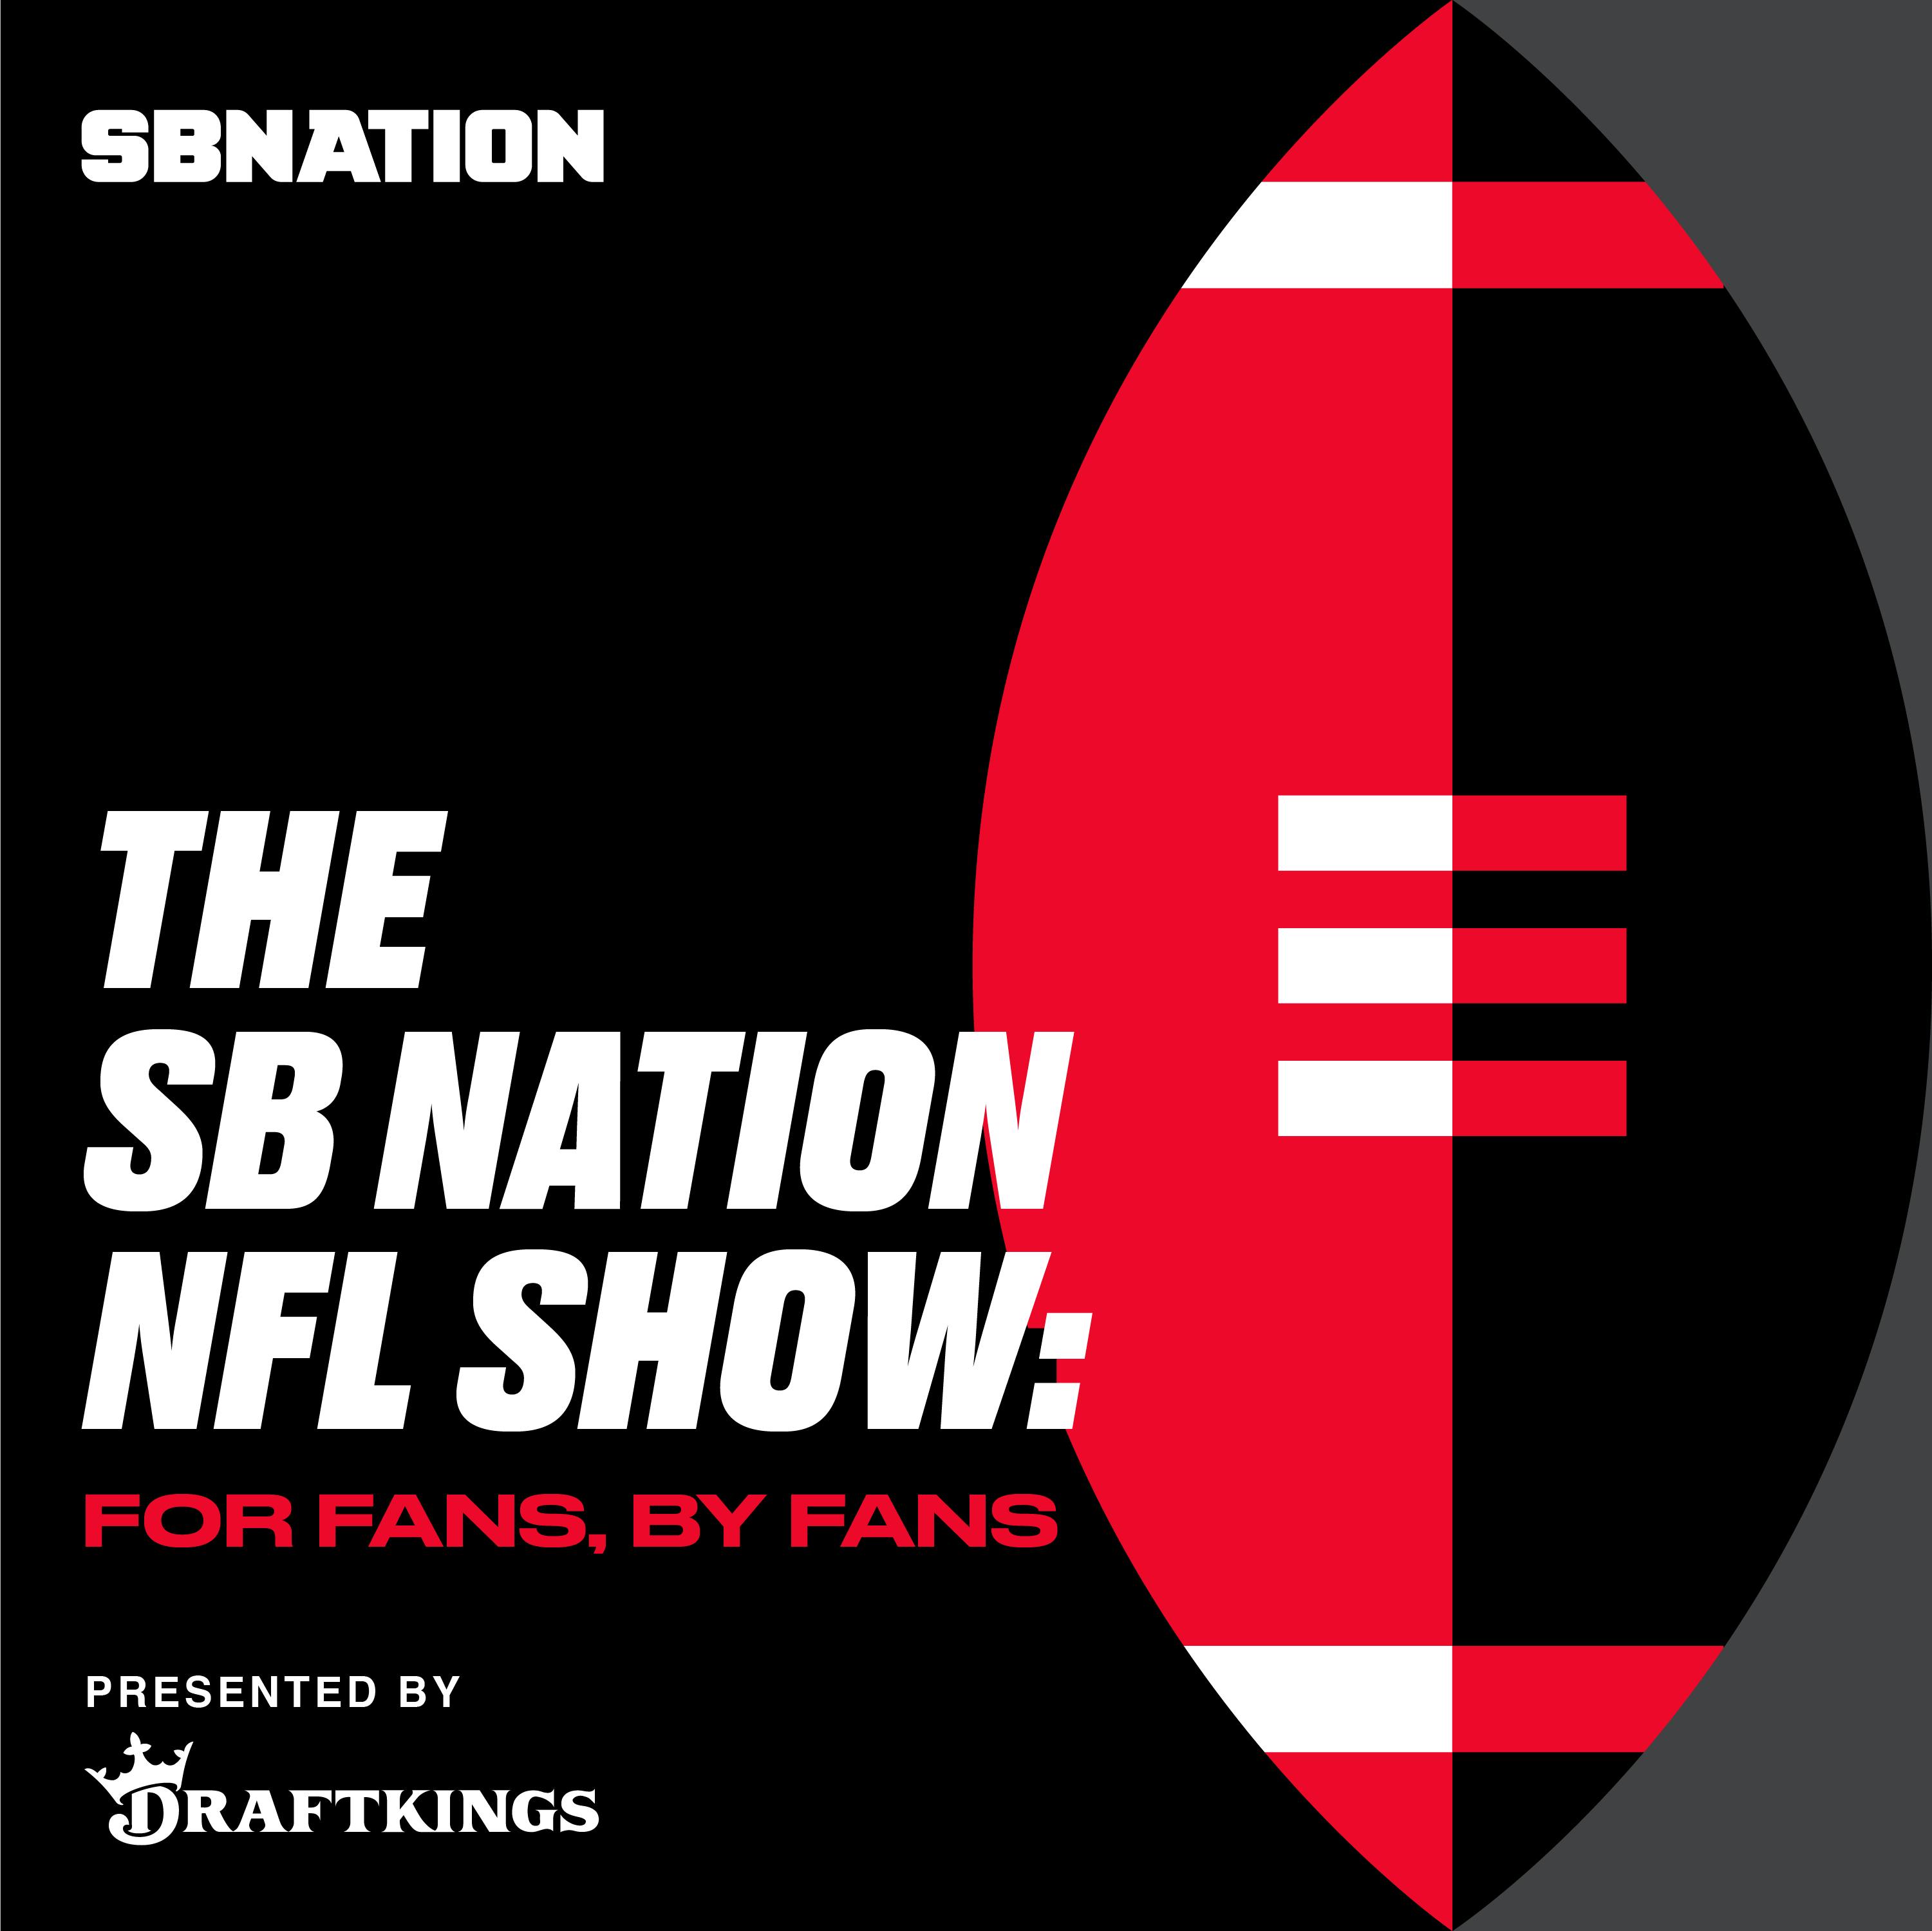 FROM THE SB NATION NFL SHOW: Do the Packers have something in Jordan Love?